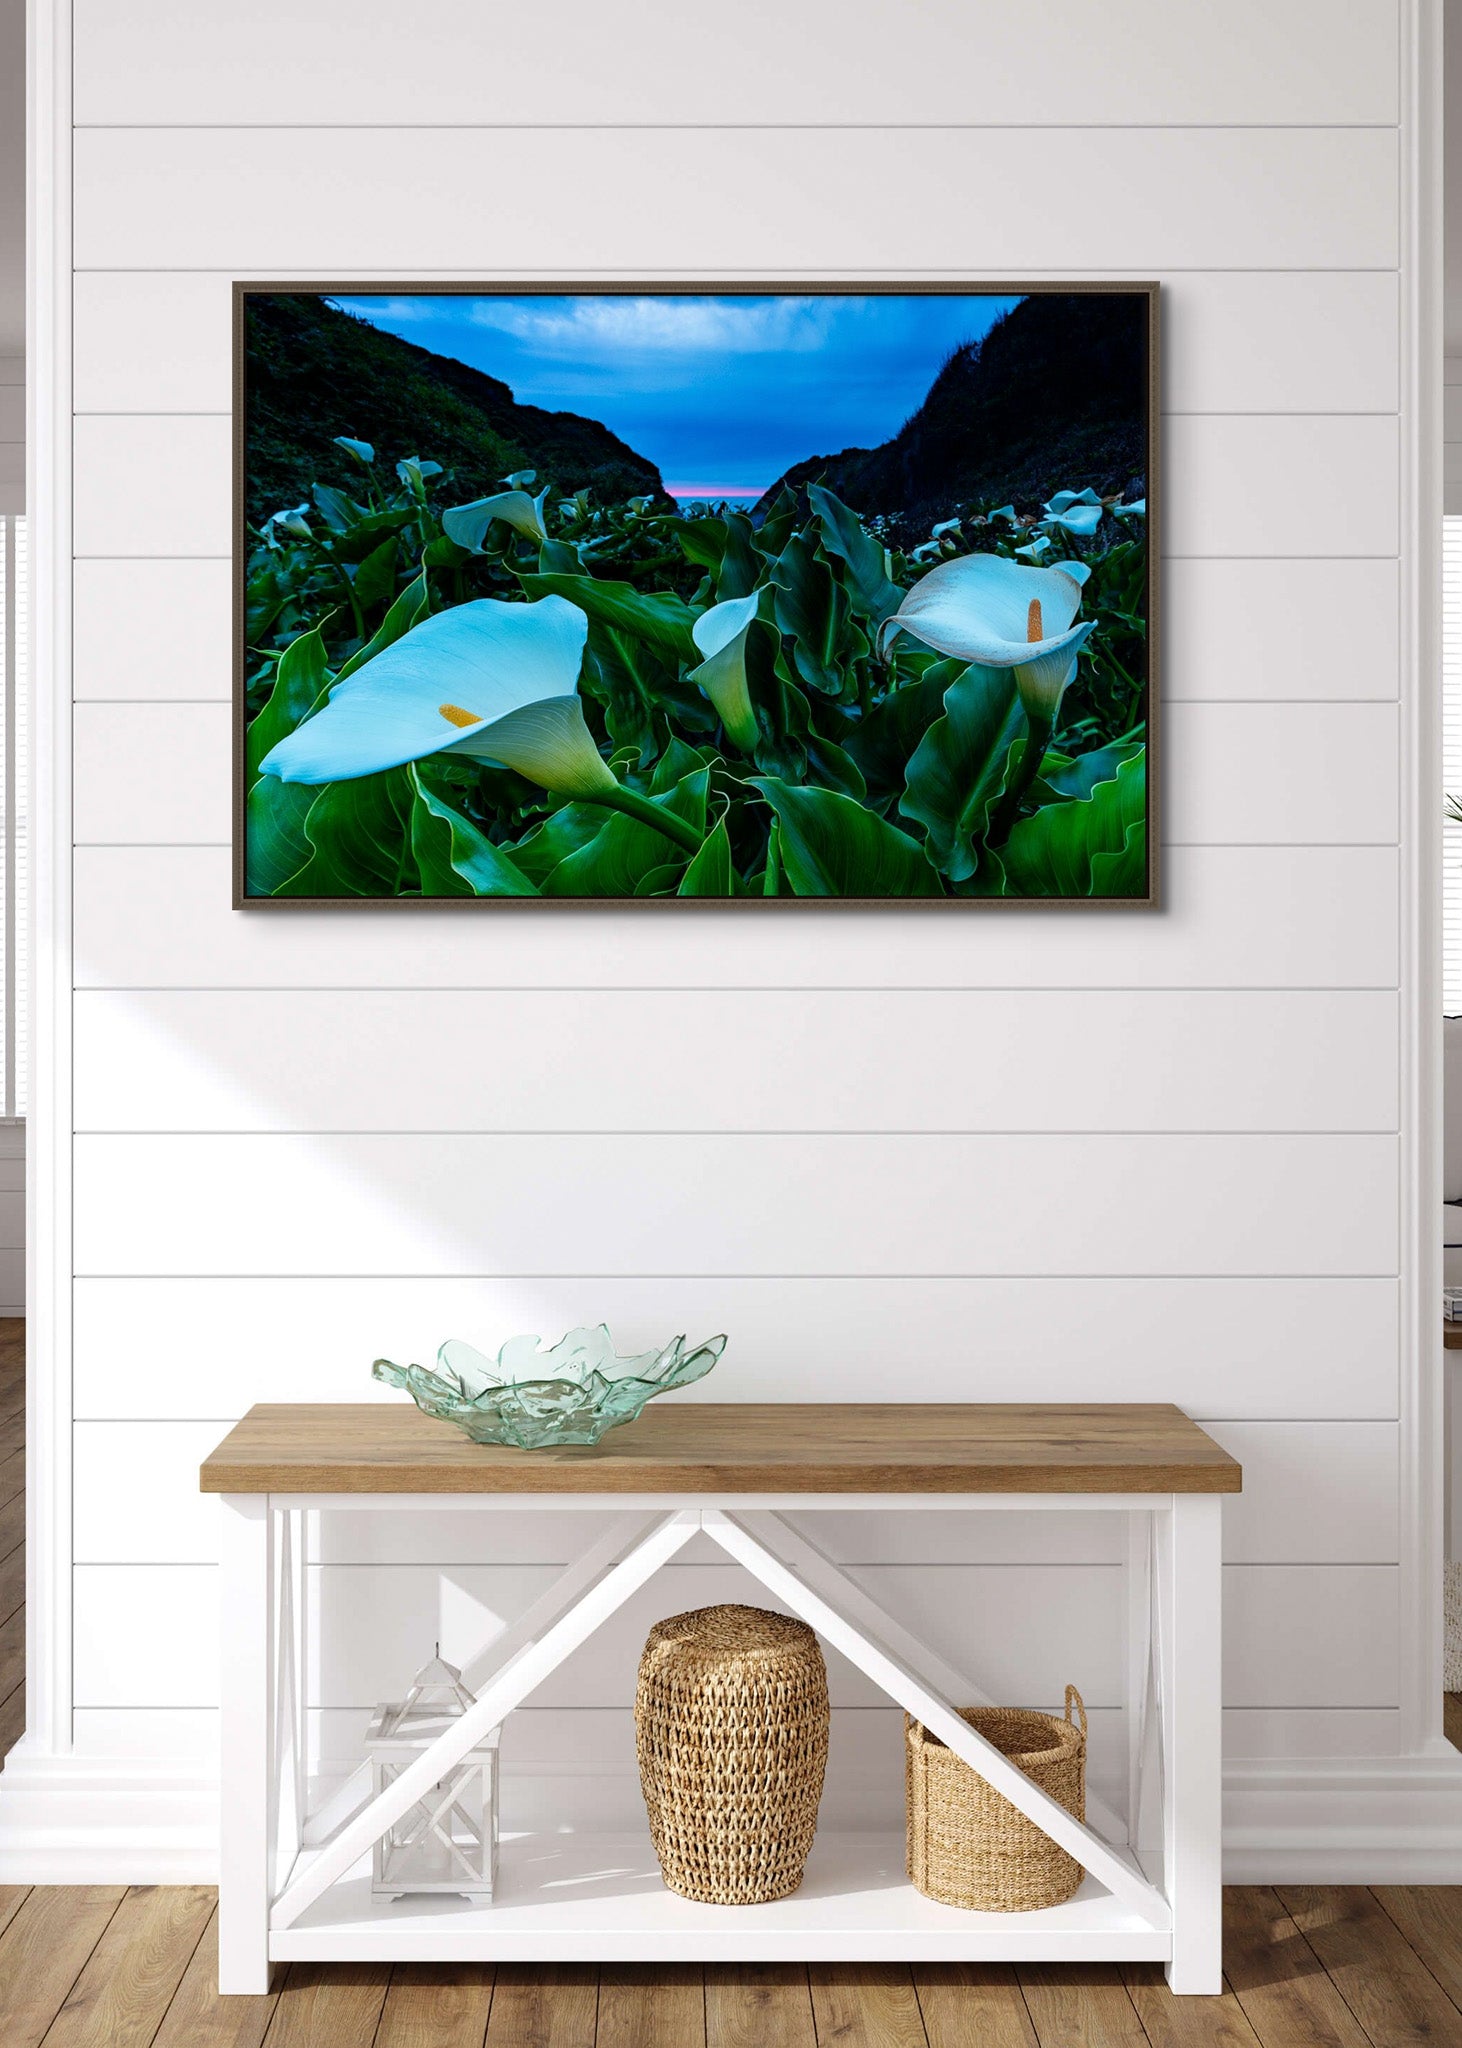 Picture hanging on the wall. The picture is a fine art landscape photograph titled "Calla Lily Valley" by Cameron Dreaux of Dreaux Fine Art.